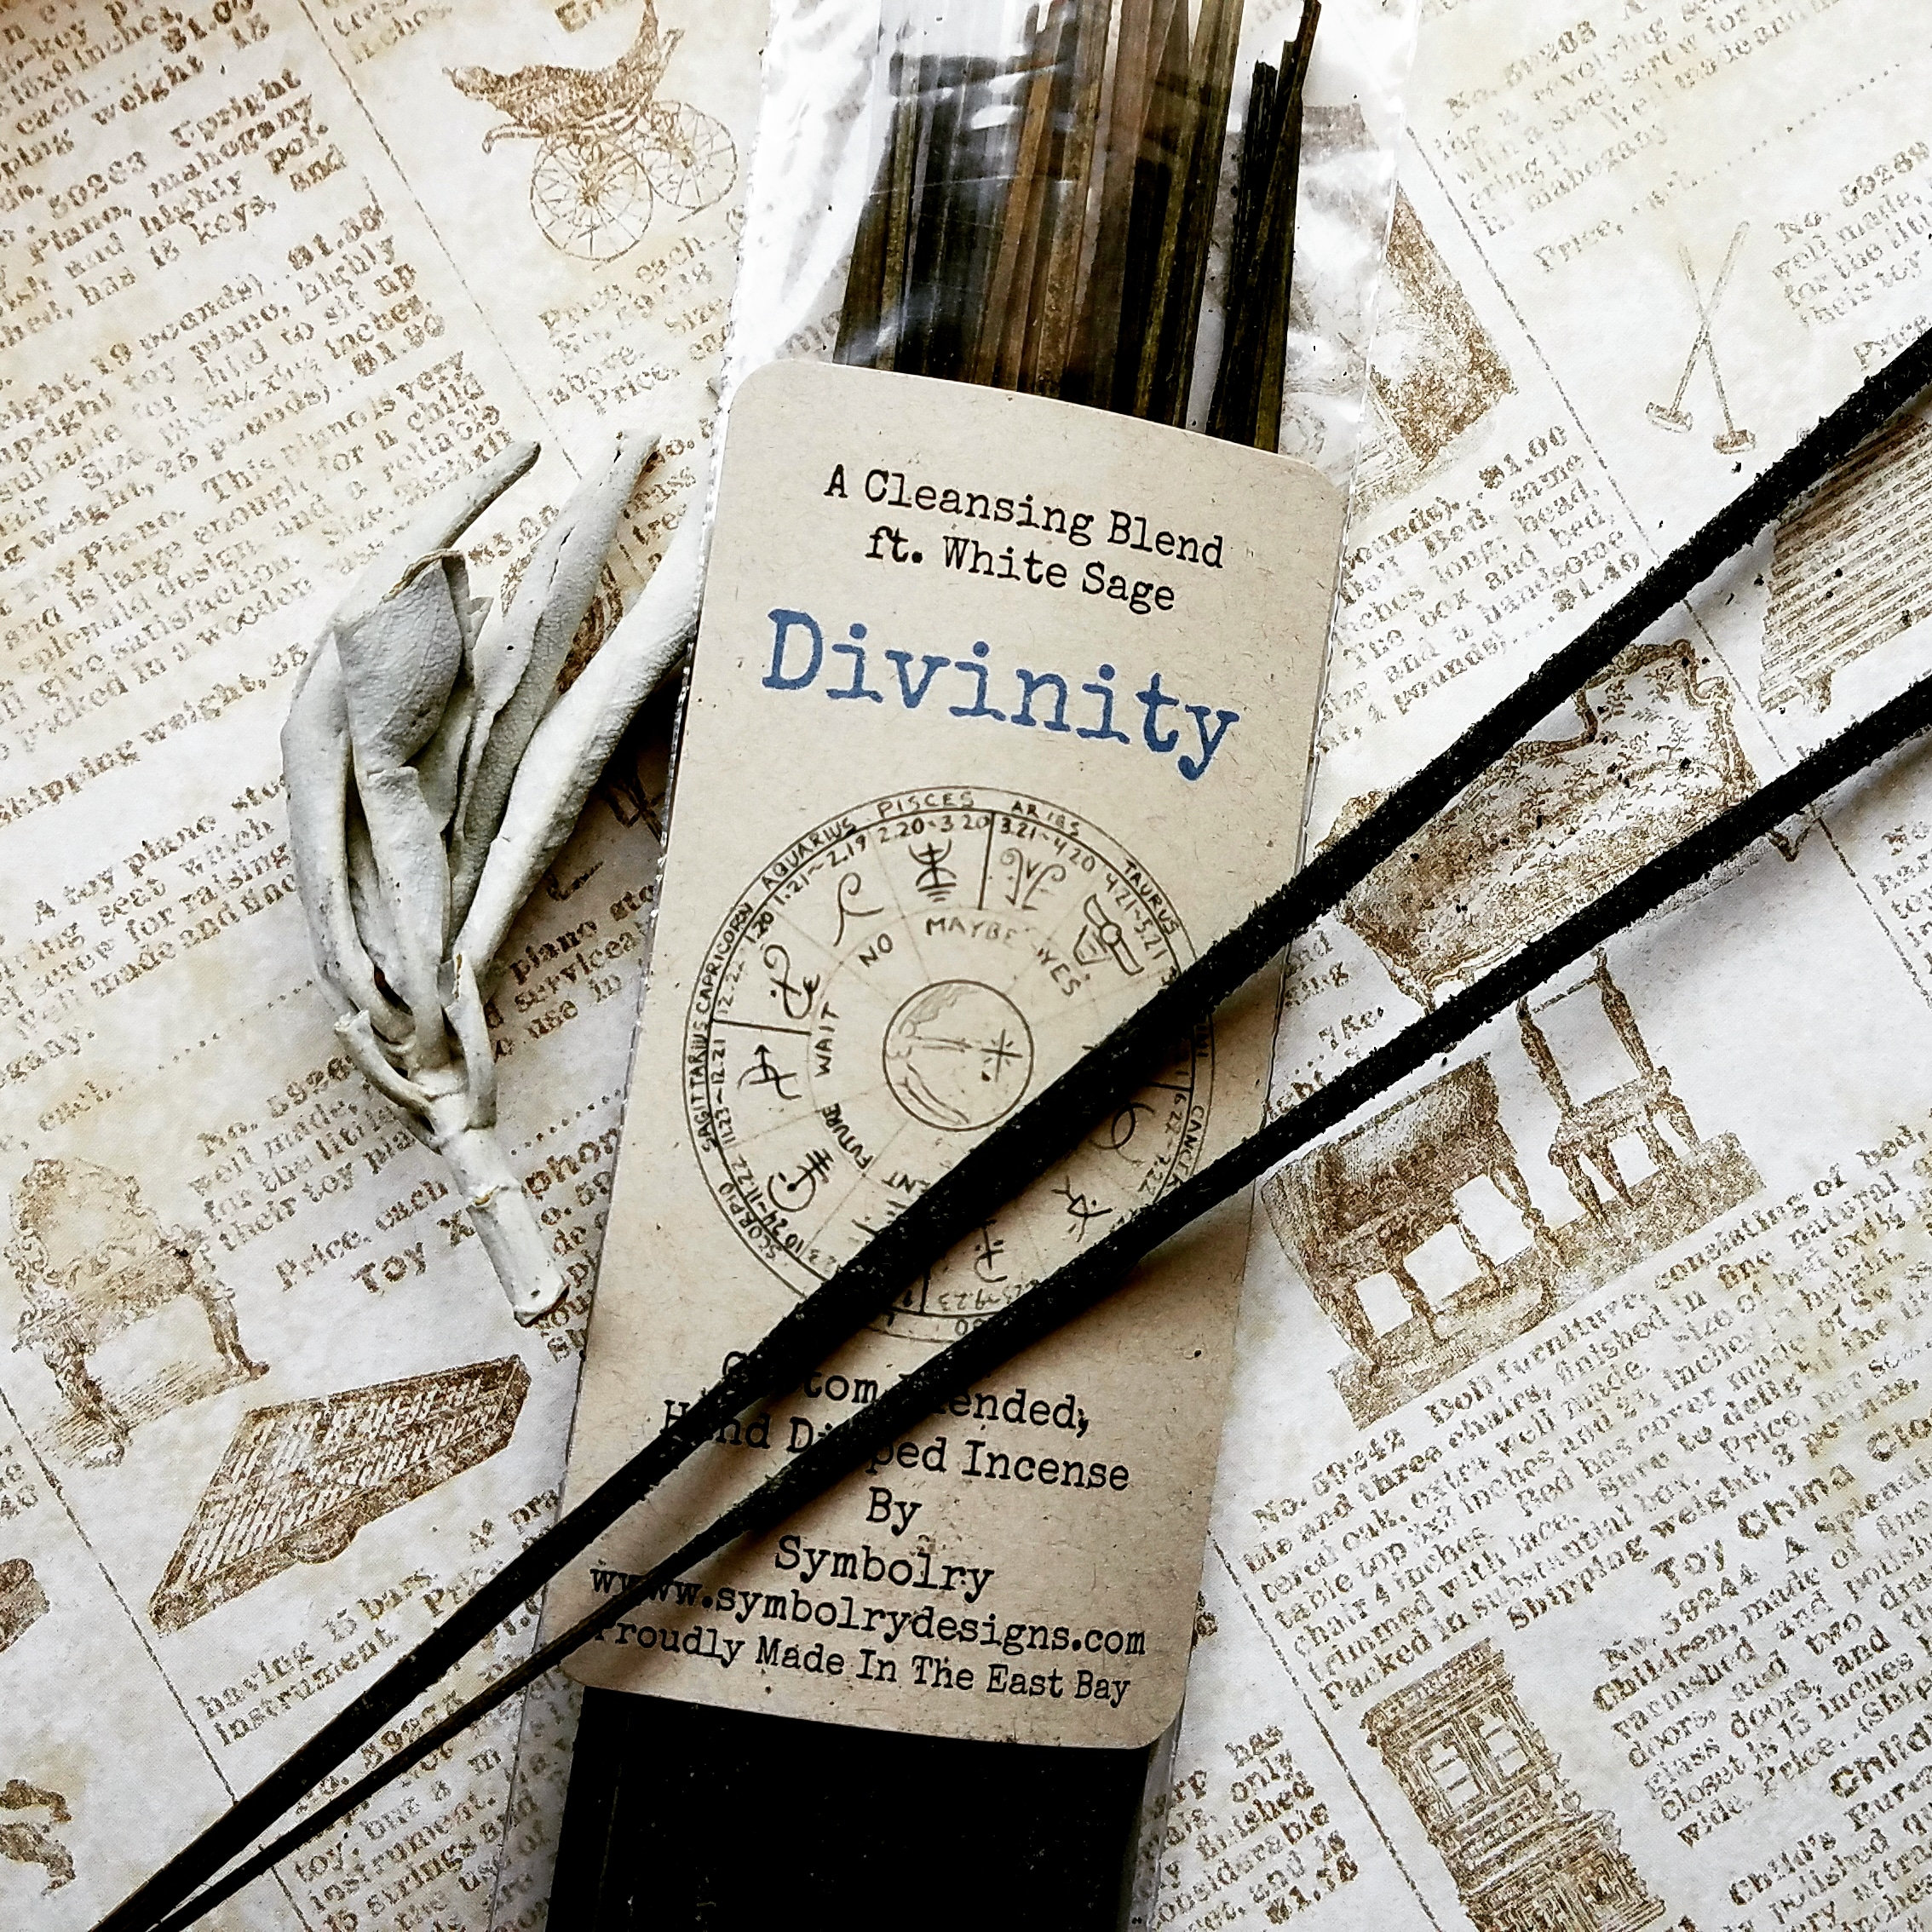 Divinity - Custom Blended, Hand Dipped Incense Featuring White Sage